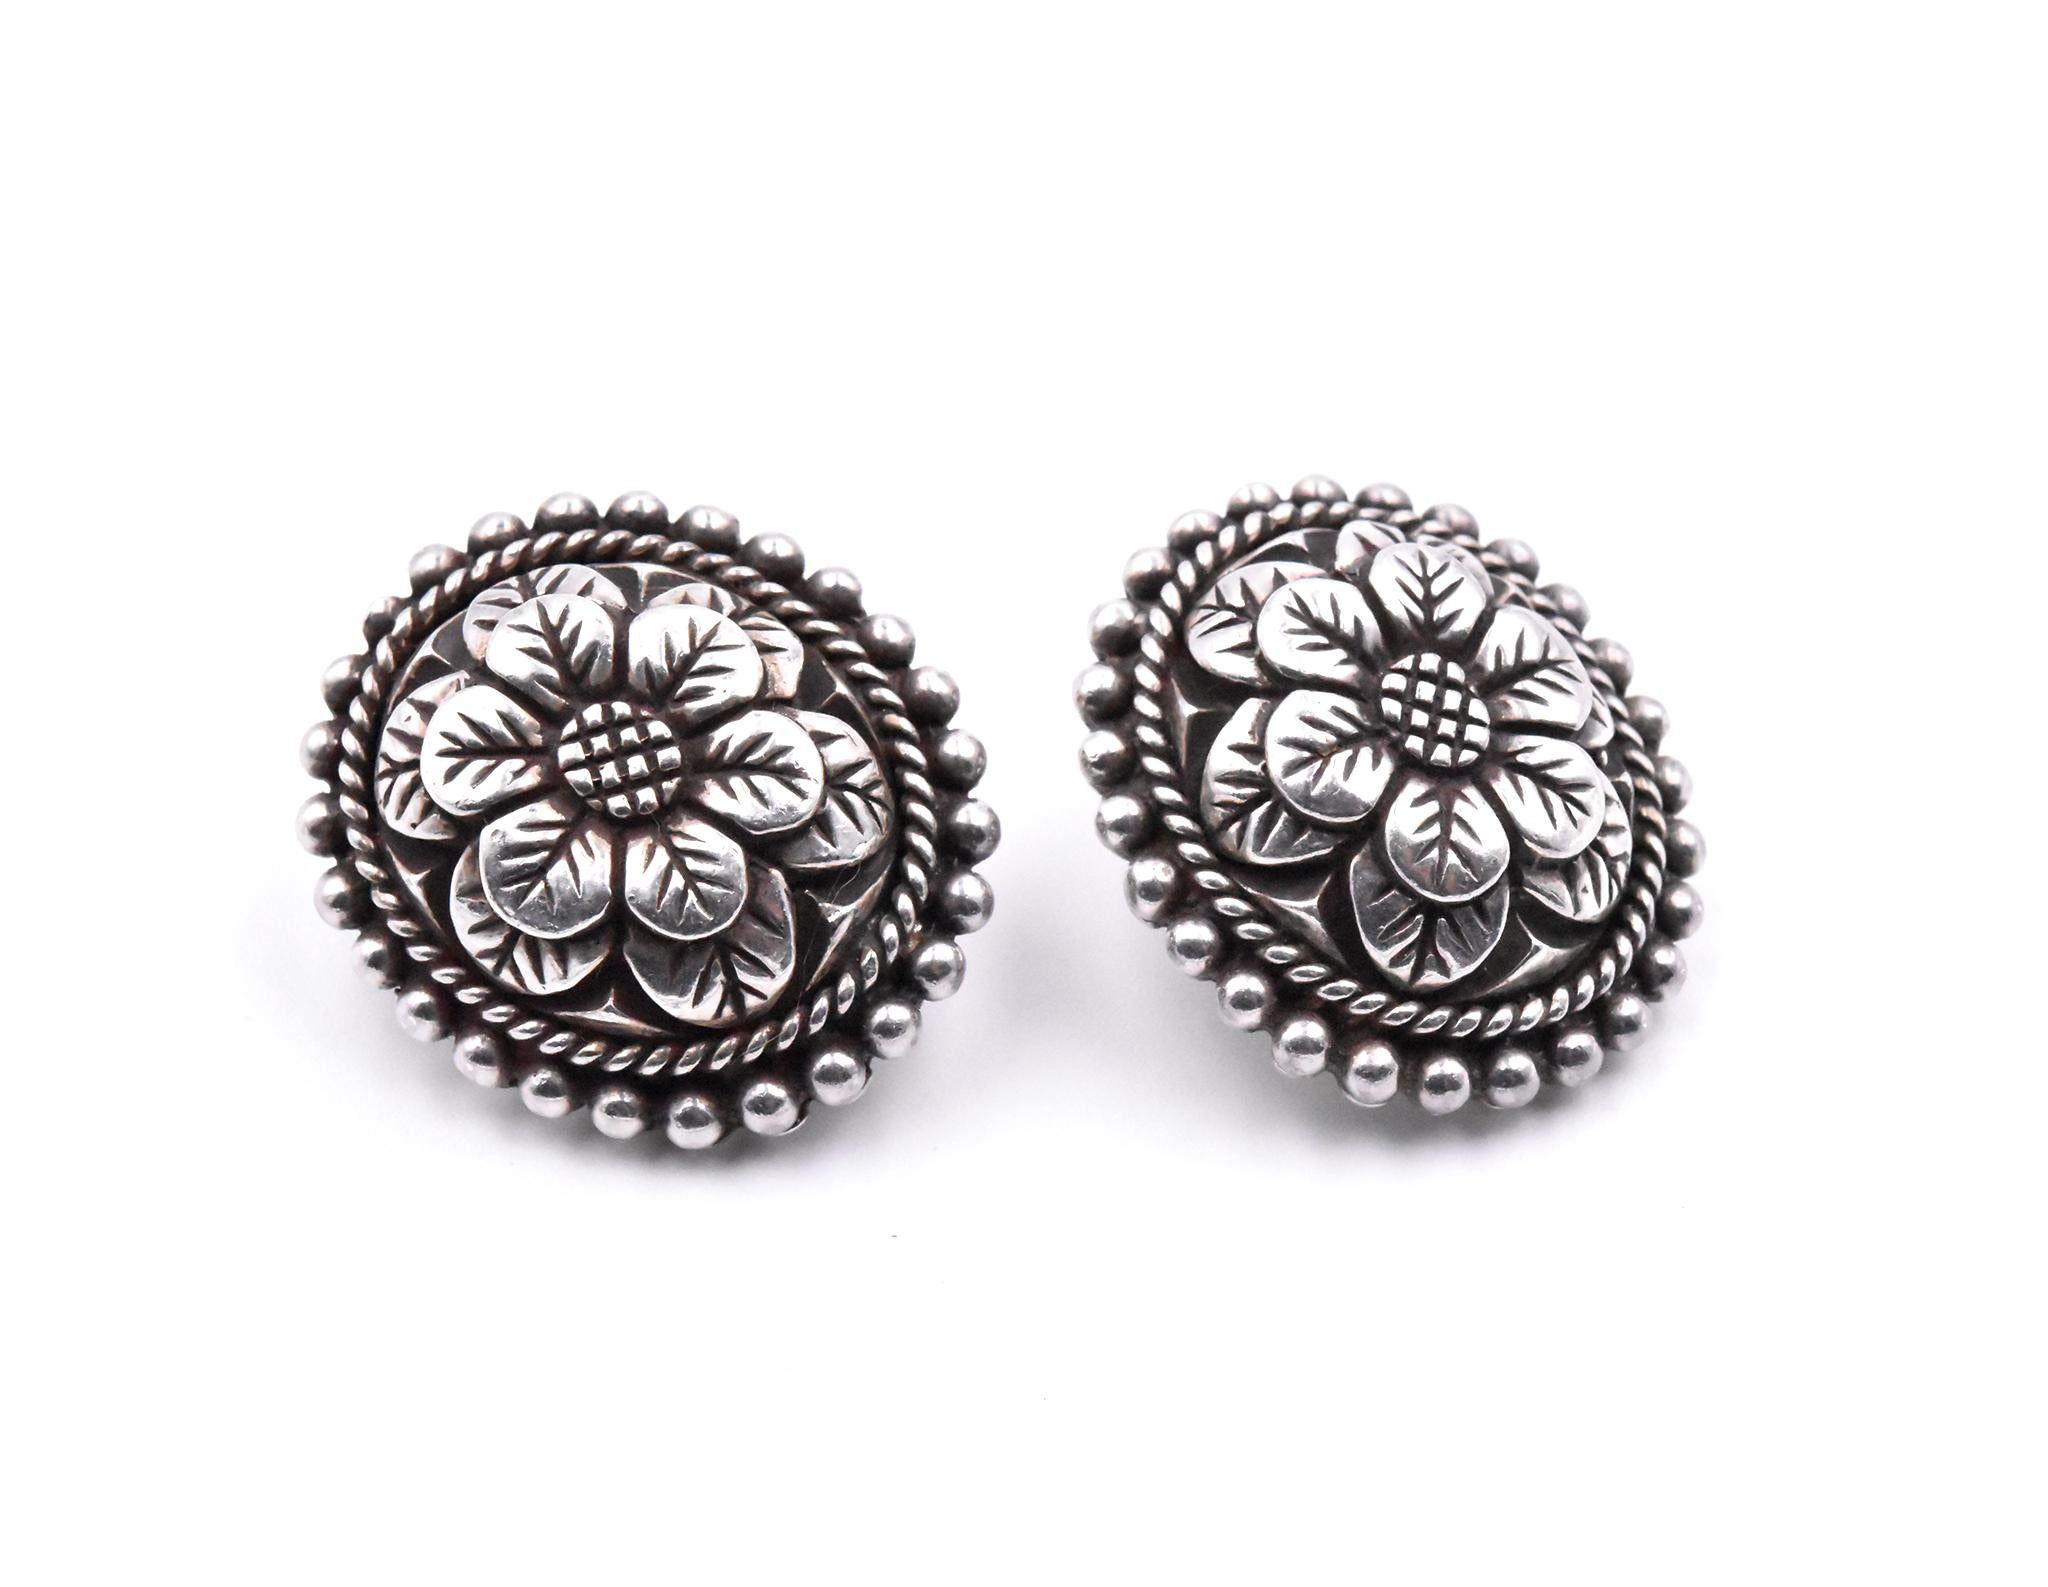 Designer: Stephen Dweck
Material: sterling silver 
Dimensions: earrings are approximately 27.50mm by 24mm
Fastenings: clip-on 
Weight: 29.7 grams
